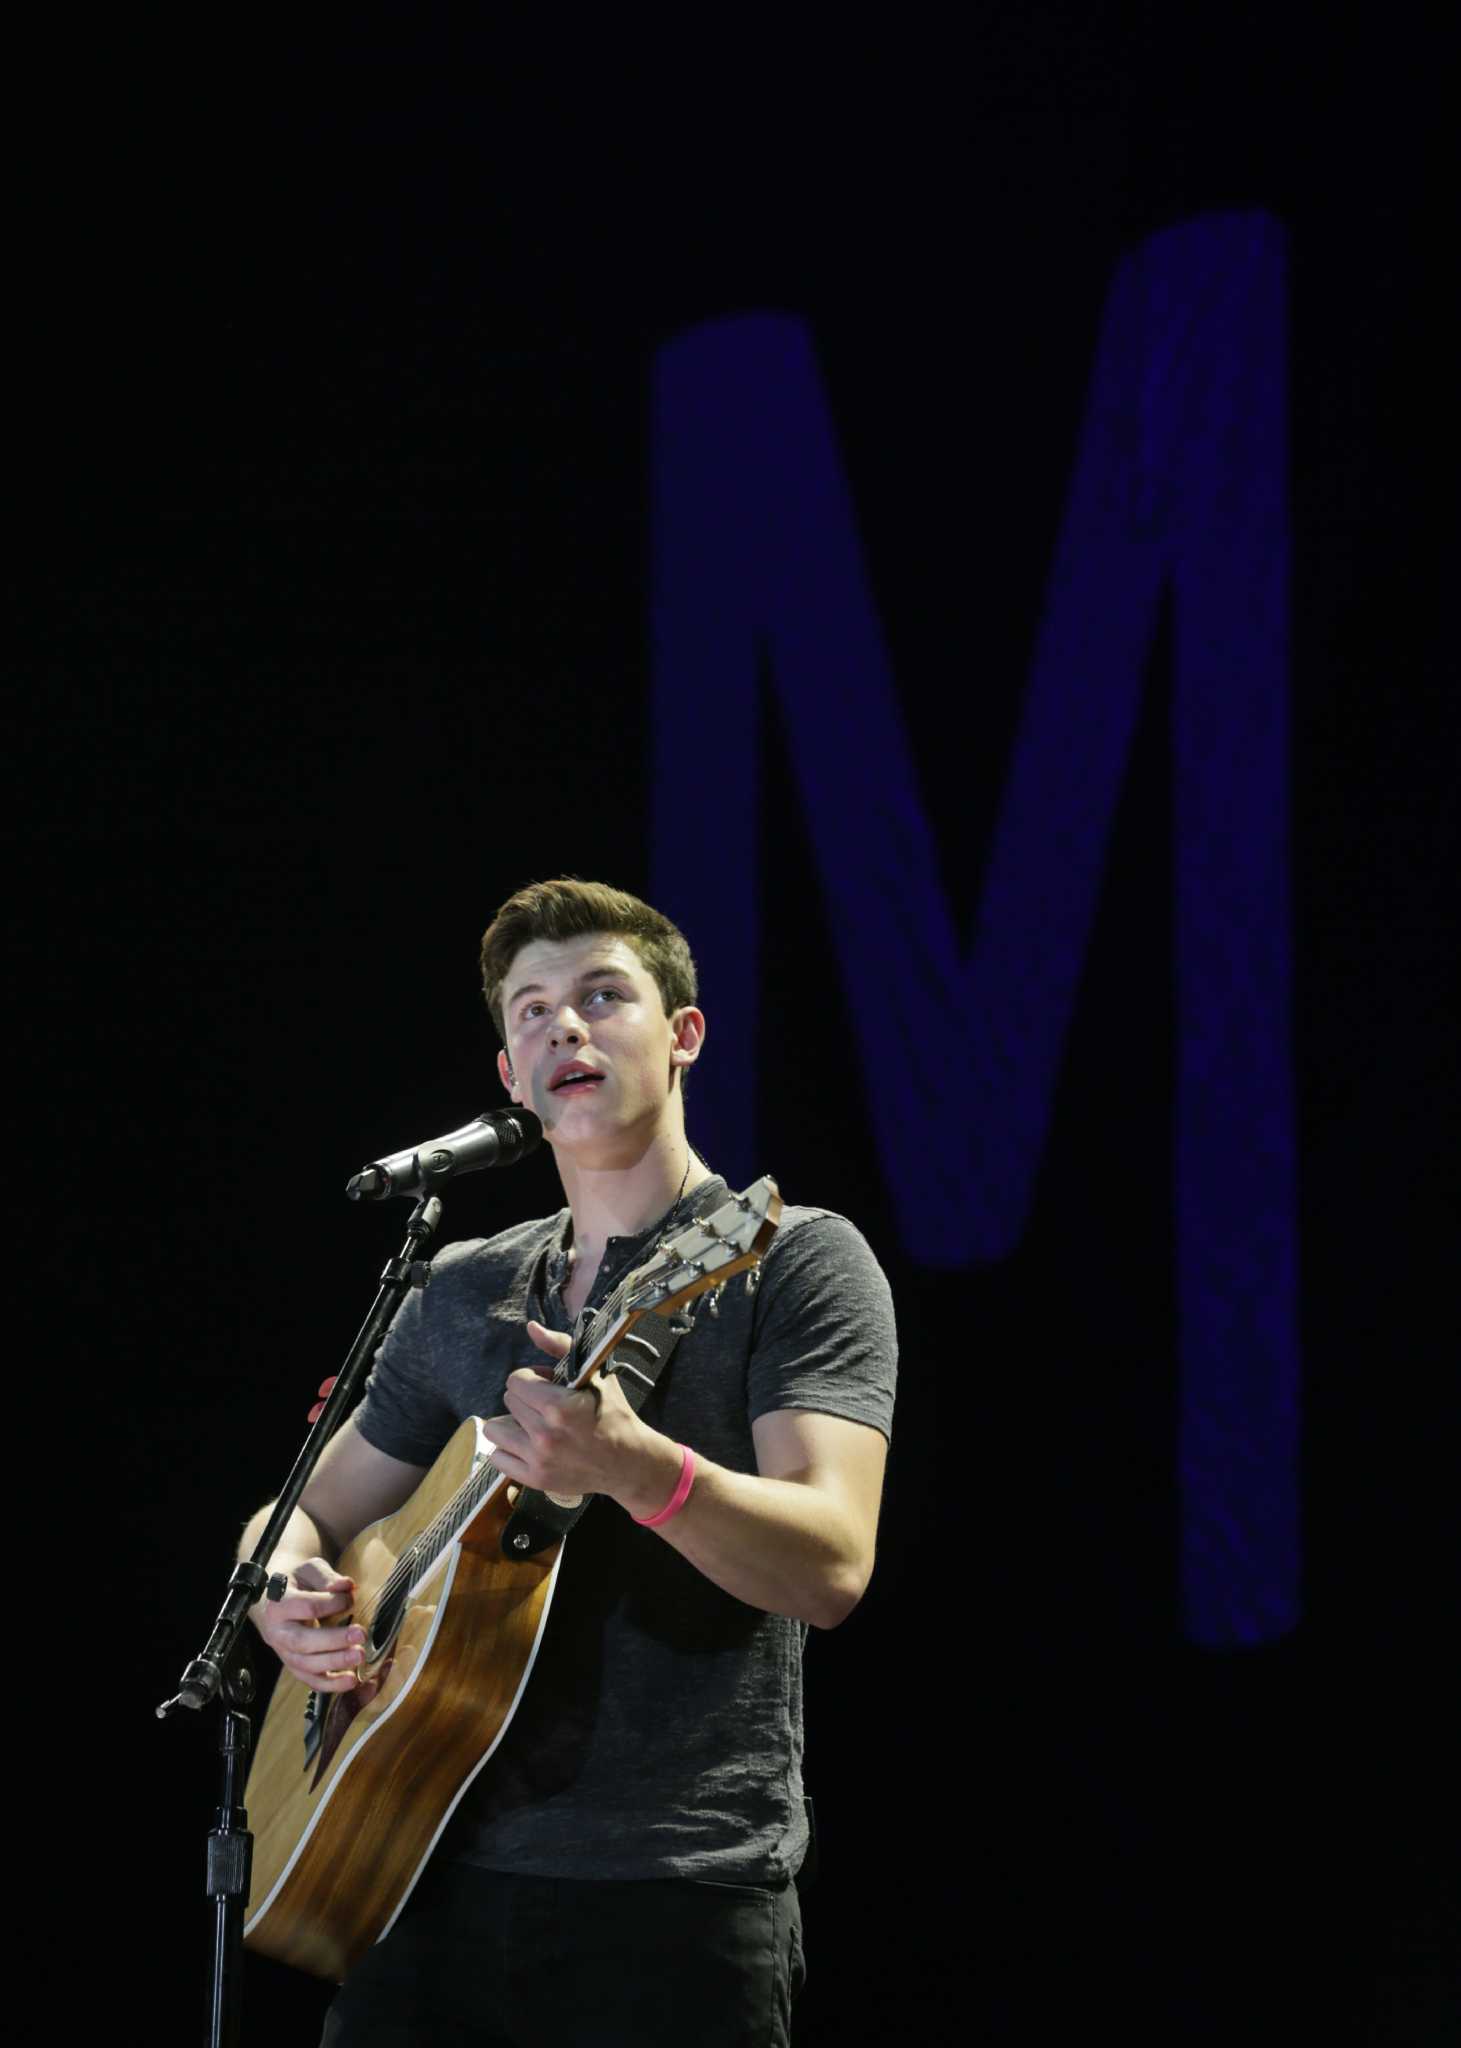 Shawn Mendes turns social-media success to success on the stage